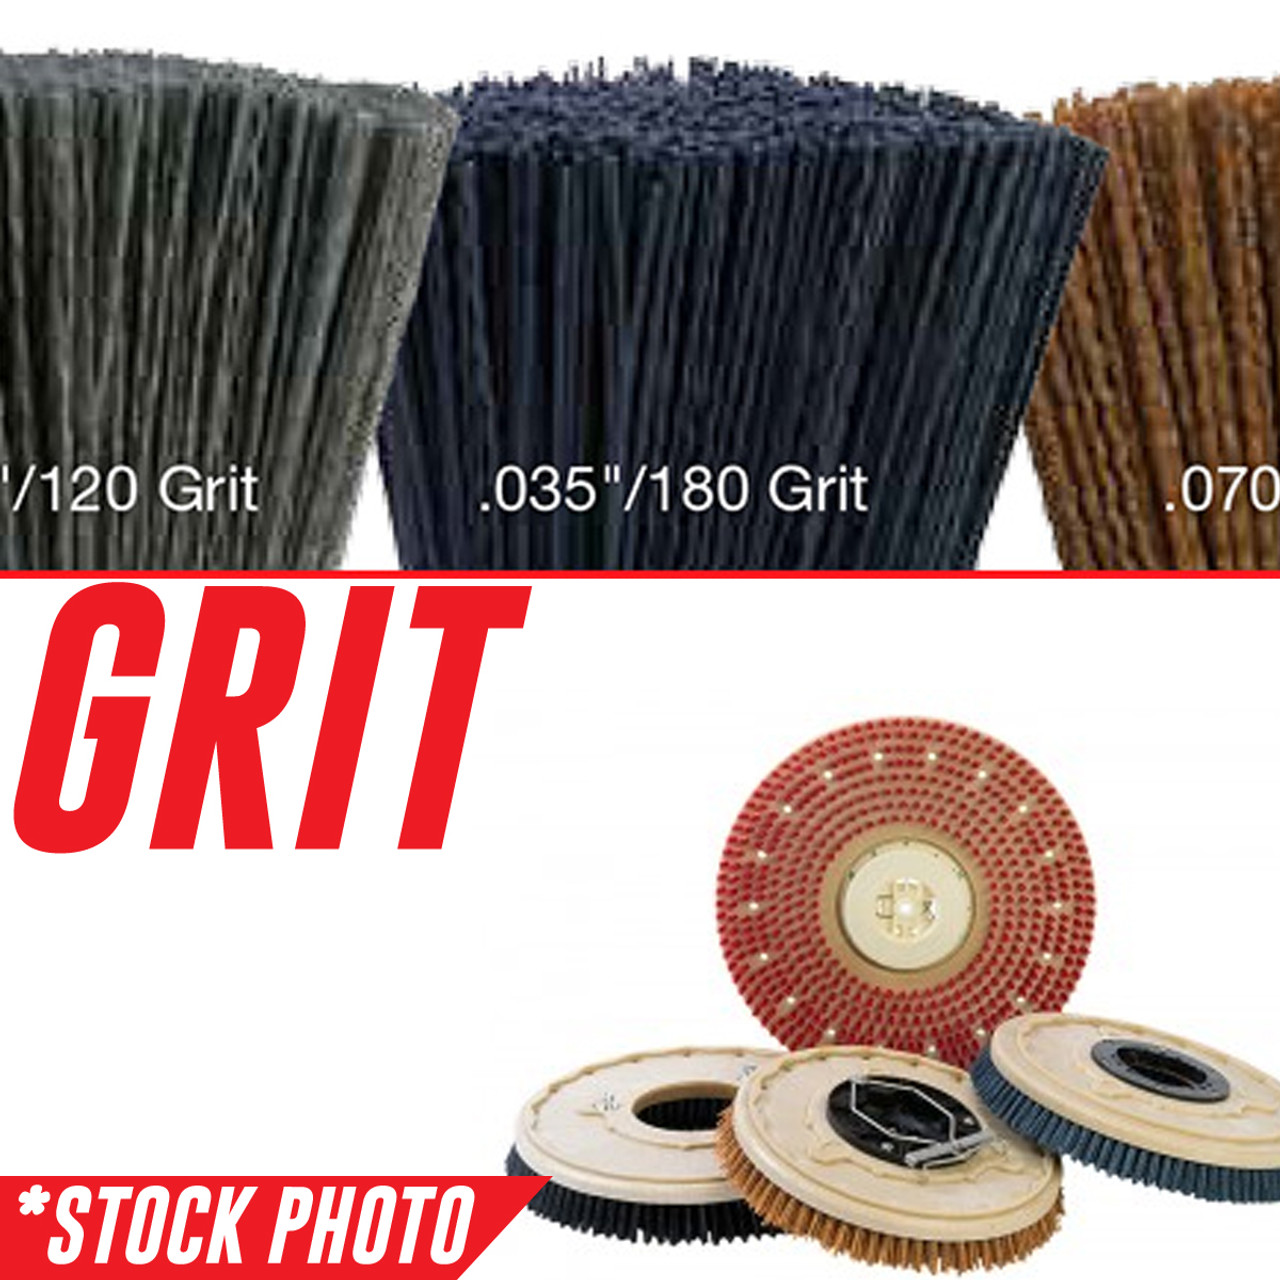 7-08-03205-1: 18" Rotary Brush .070"/46 Grit fits American-Lincoln Models 772, 7760, 7765, 9772